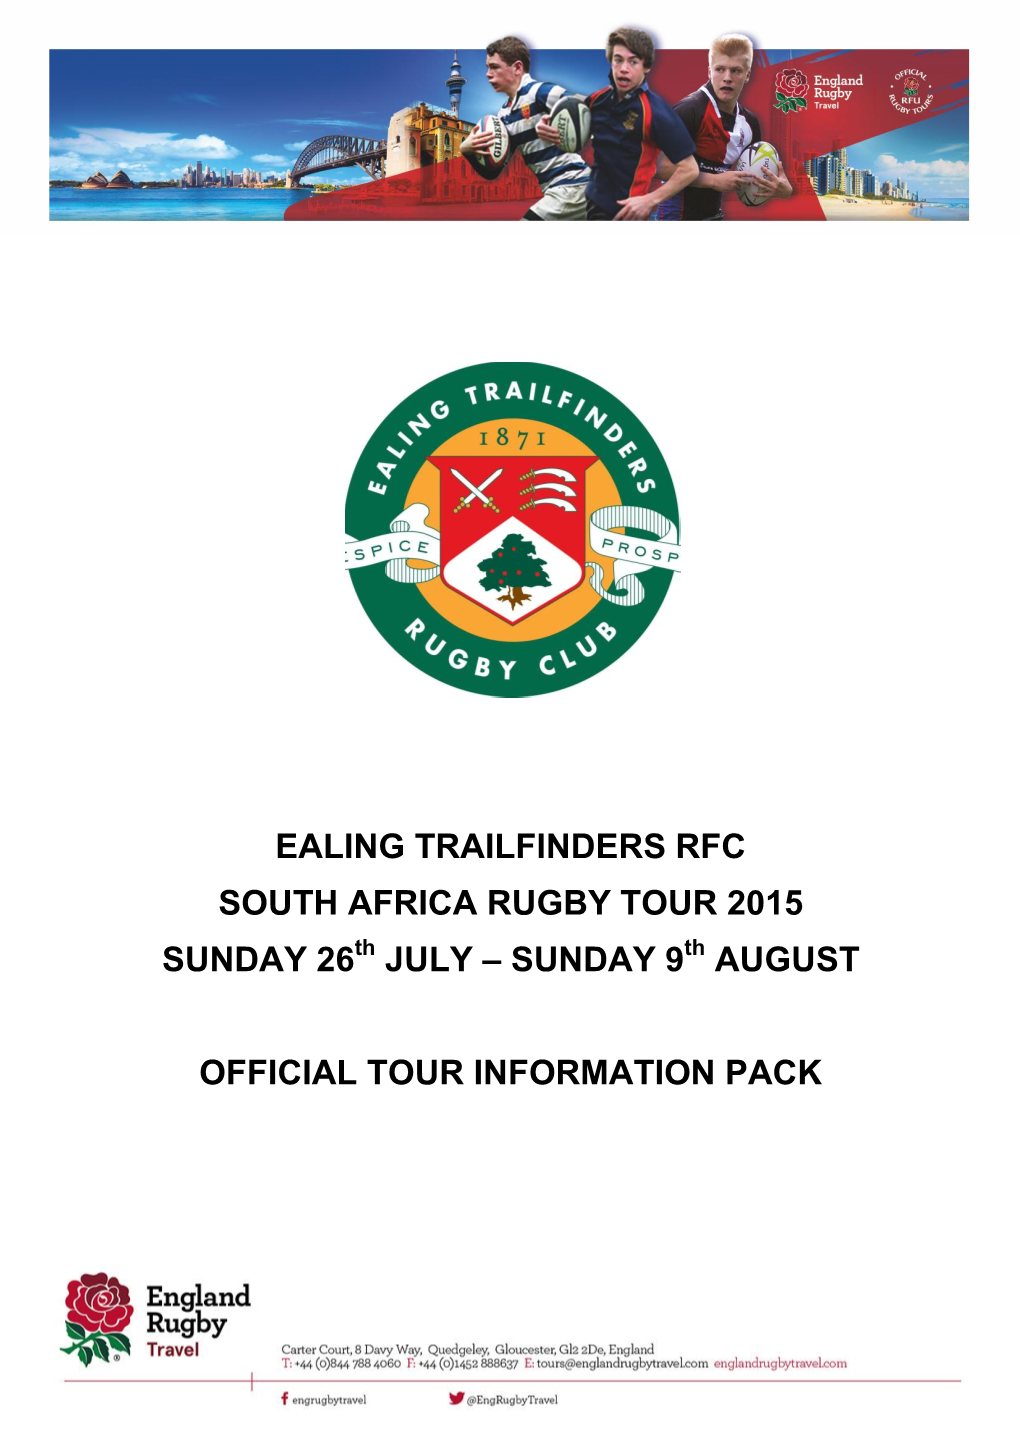 EALING TRAILFINDERS RFC SOUTH AFRICA RUGBY TOUR 2015 SUNDAY 26Th JULY – SUNDAY 9Th AUGUST